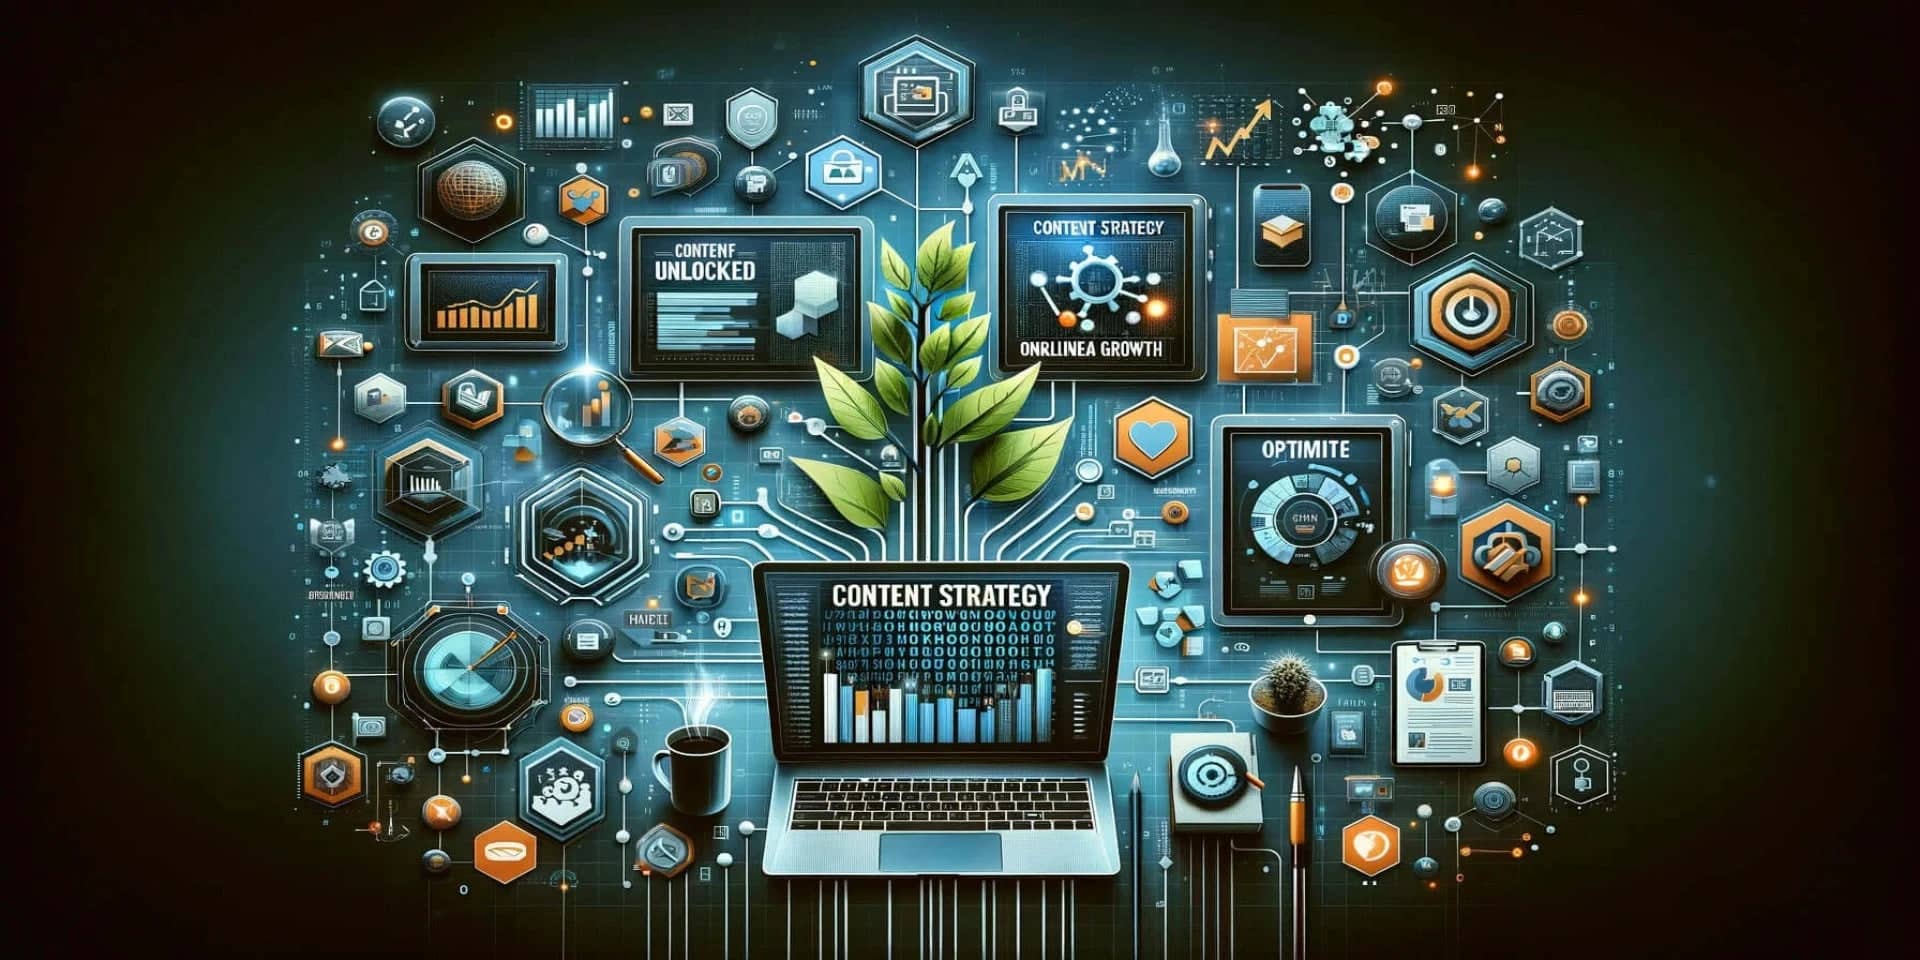 We Will Create In-Depth Content Strategy Reports for Online Businesses